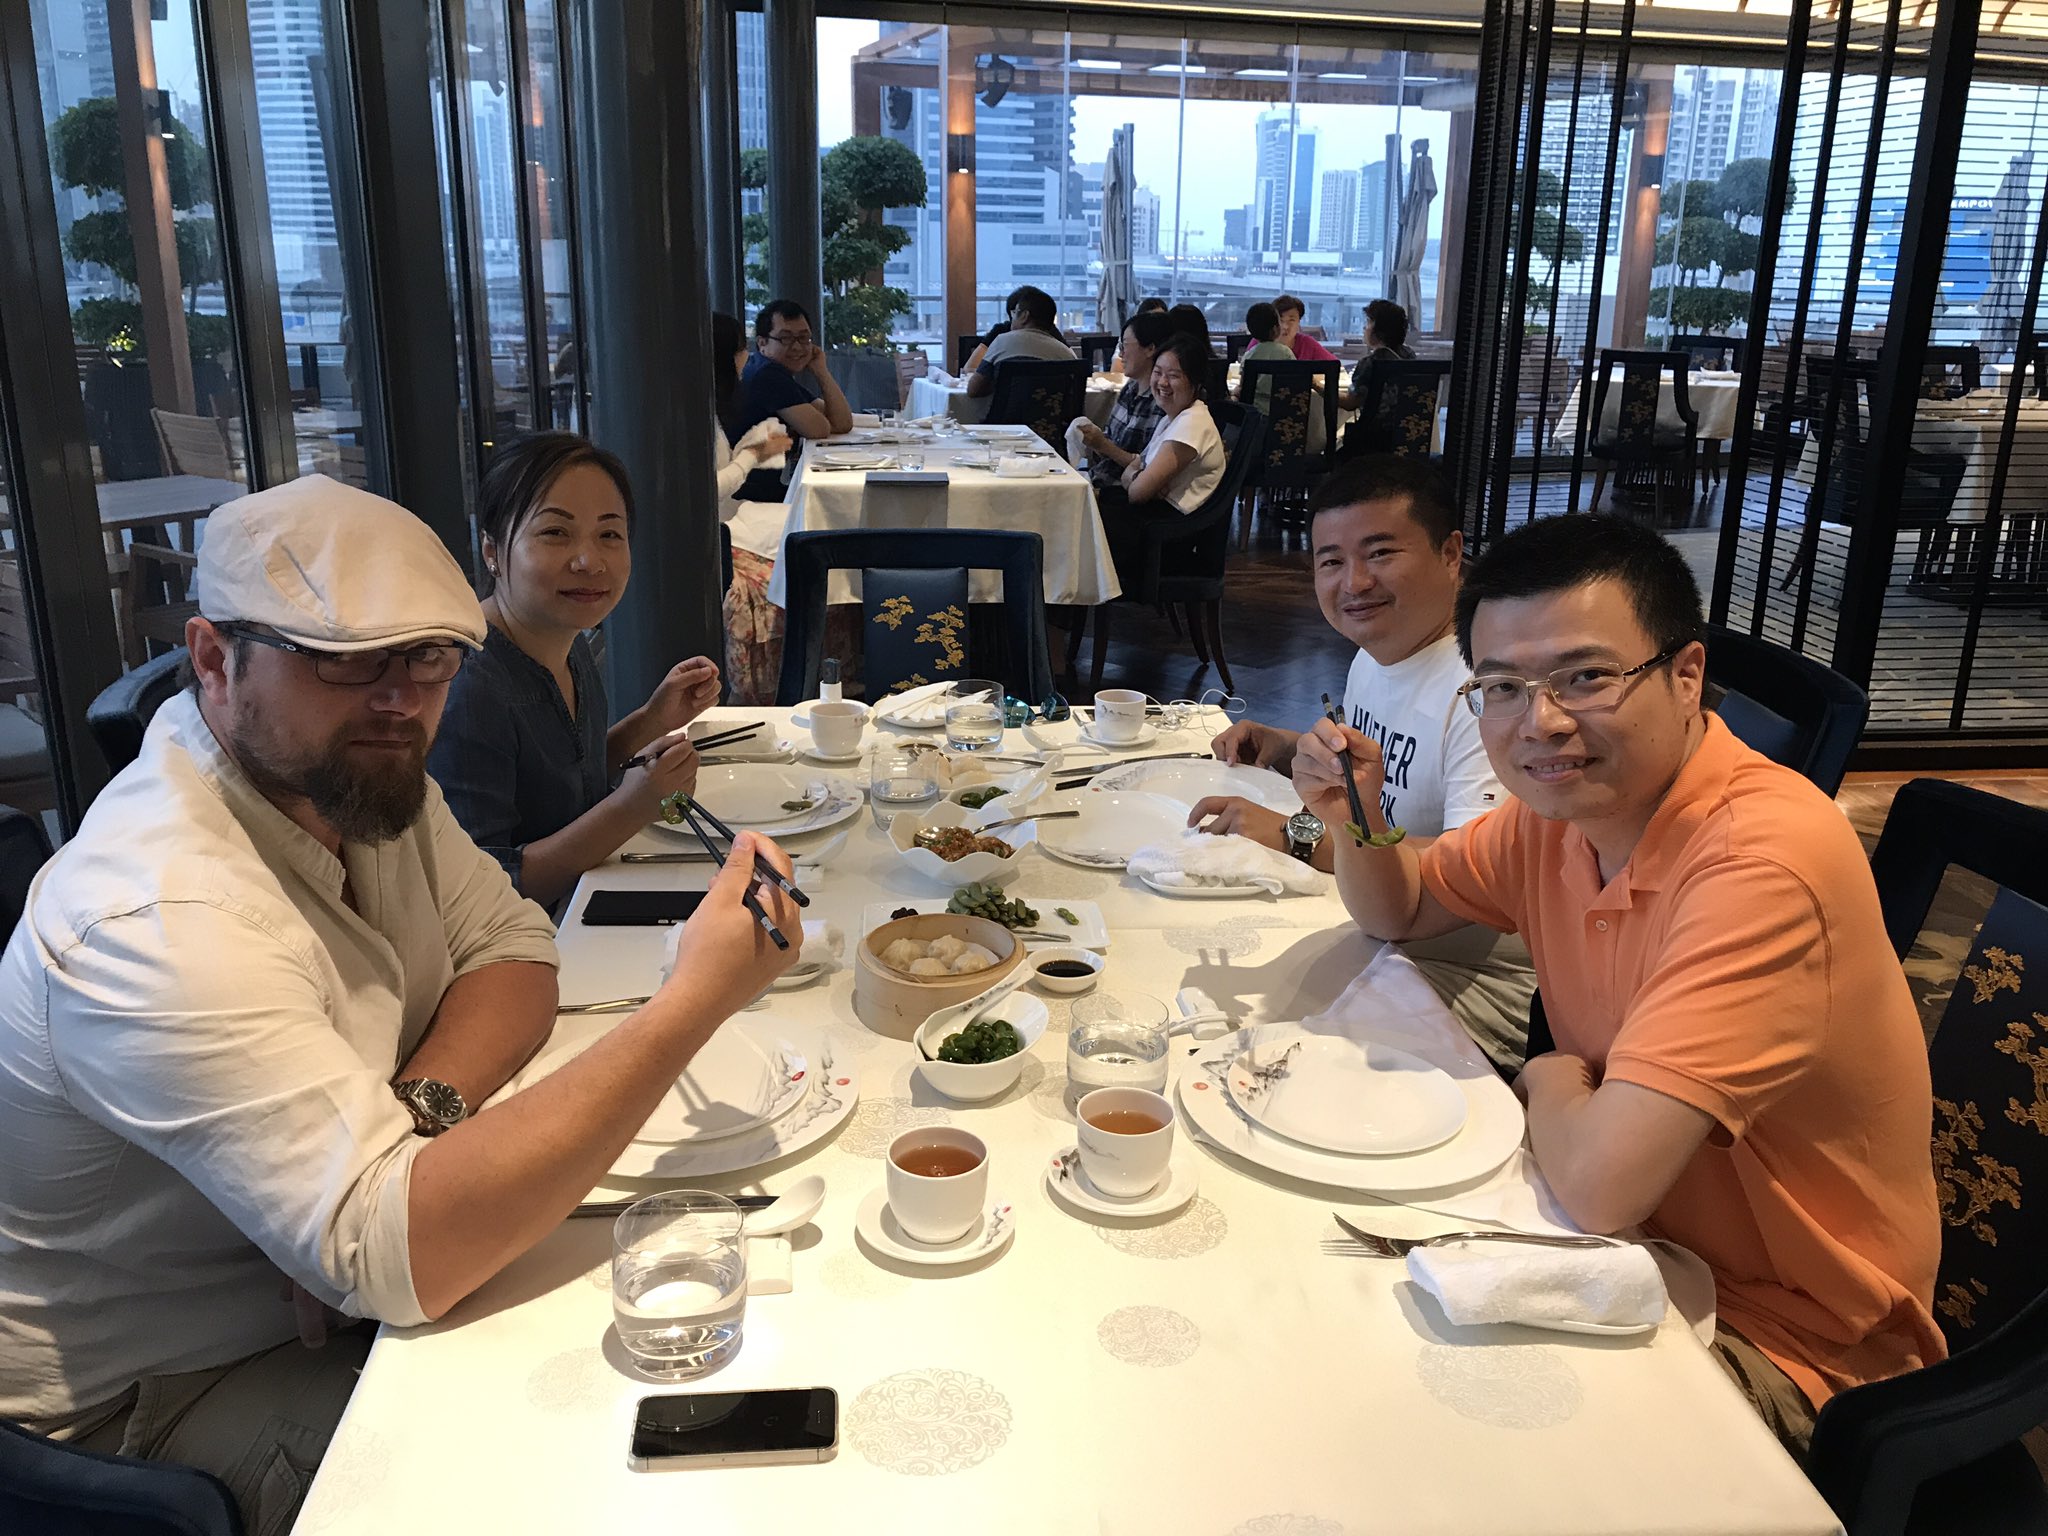 longtengseafood On Twitter Guests Enjoy With Us In Long Teng Seafood Restaurant They All Like Our Dim Sum Very Much Delicious Food Business Bay Restaurant Dumplings Https T Co Npdenviru Twitter - Long Teng Seafood Restaurant